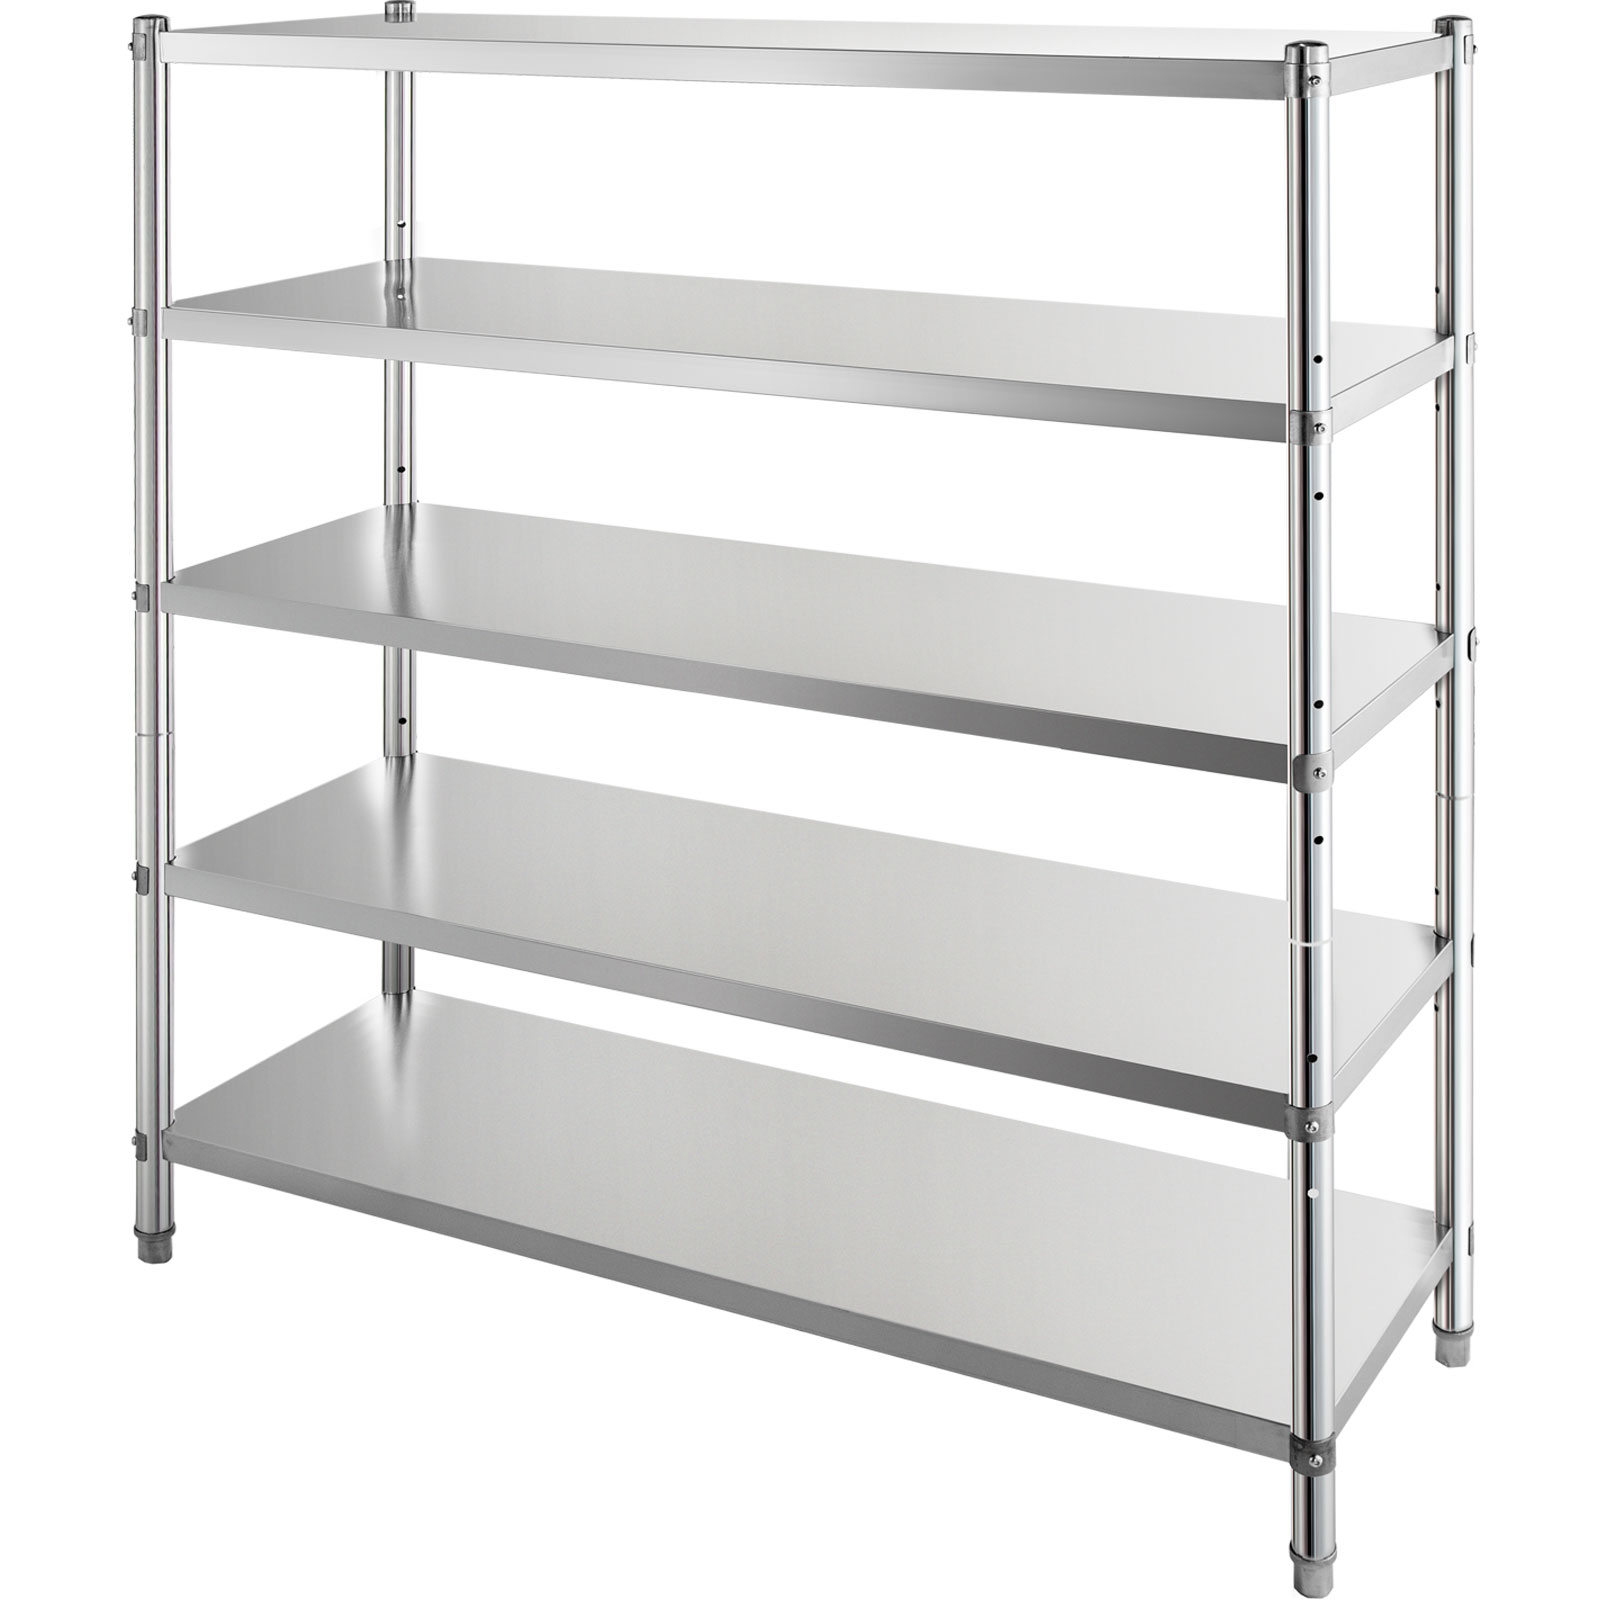 Stainless Steel 4/5 Tier Kitchen Shelf Catering Shelving Unit Food Storage Rack 